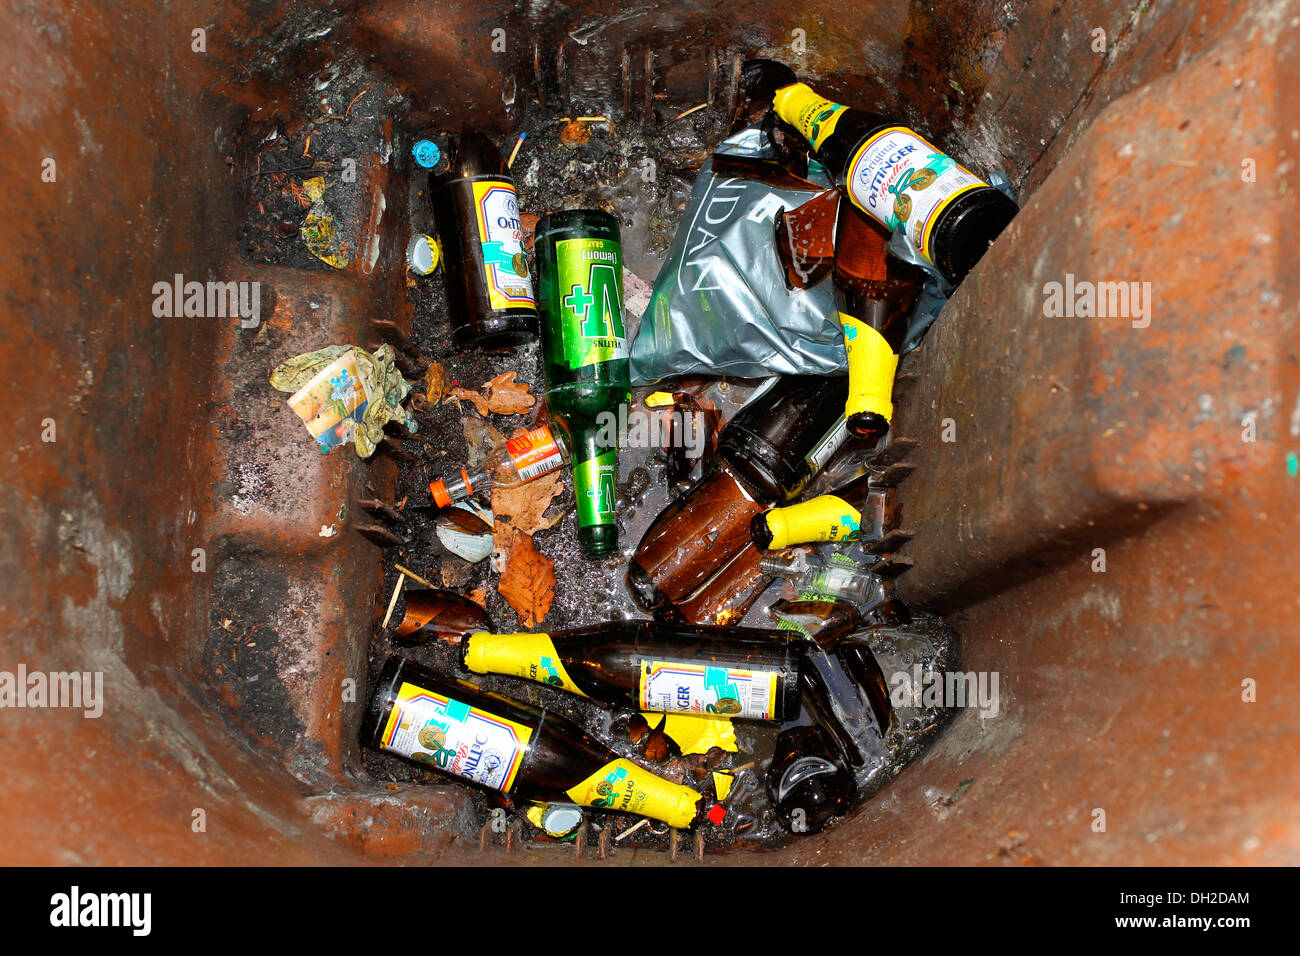 Contents of a rubbish bin after a carnival parade, Mülheim-Kärlich, Rhineland-Palatinate, Germany Stock Photo